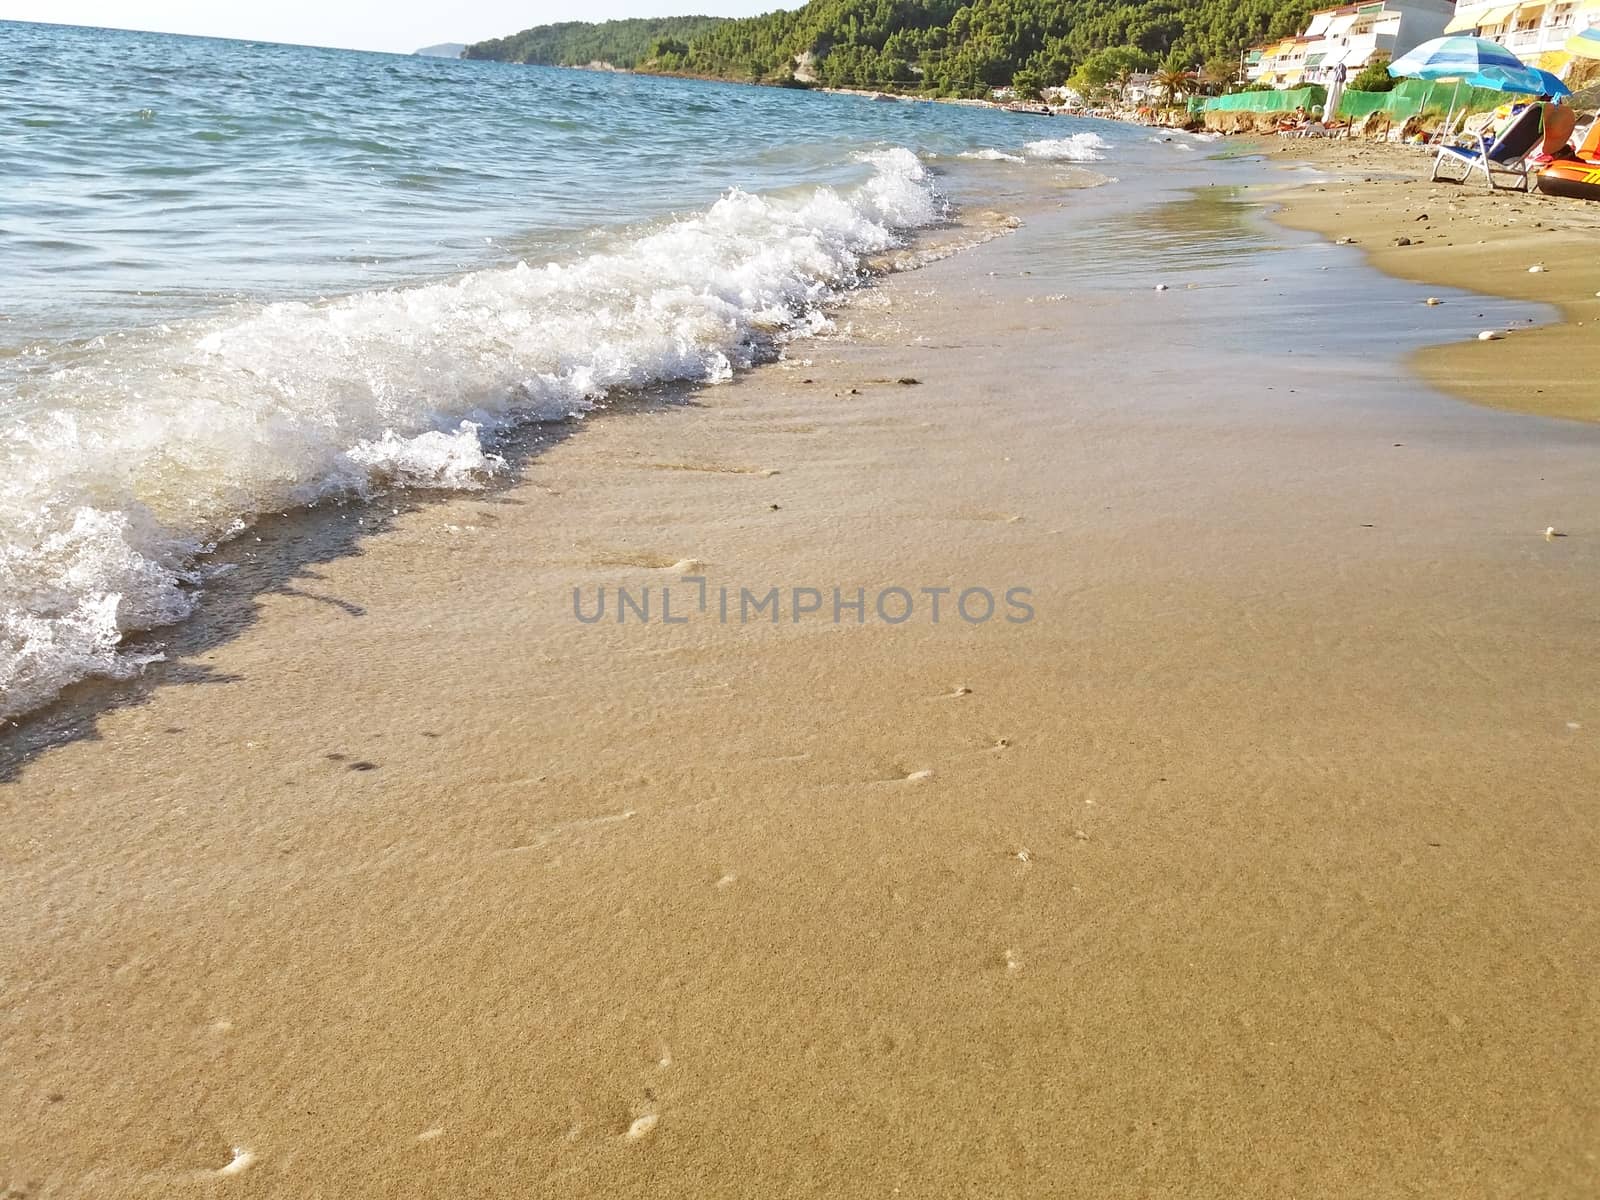 The Mediterranean Sea in Greece, The waves of the sea by Mindru